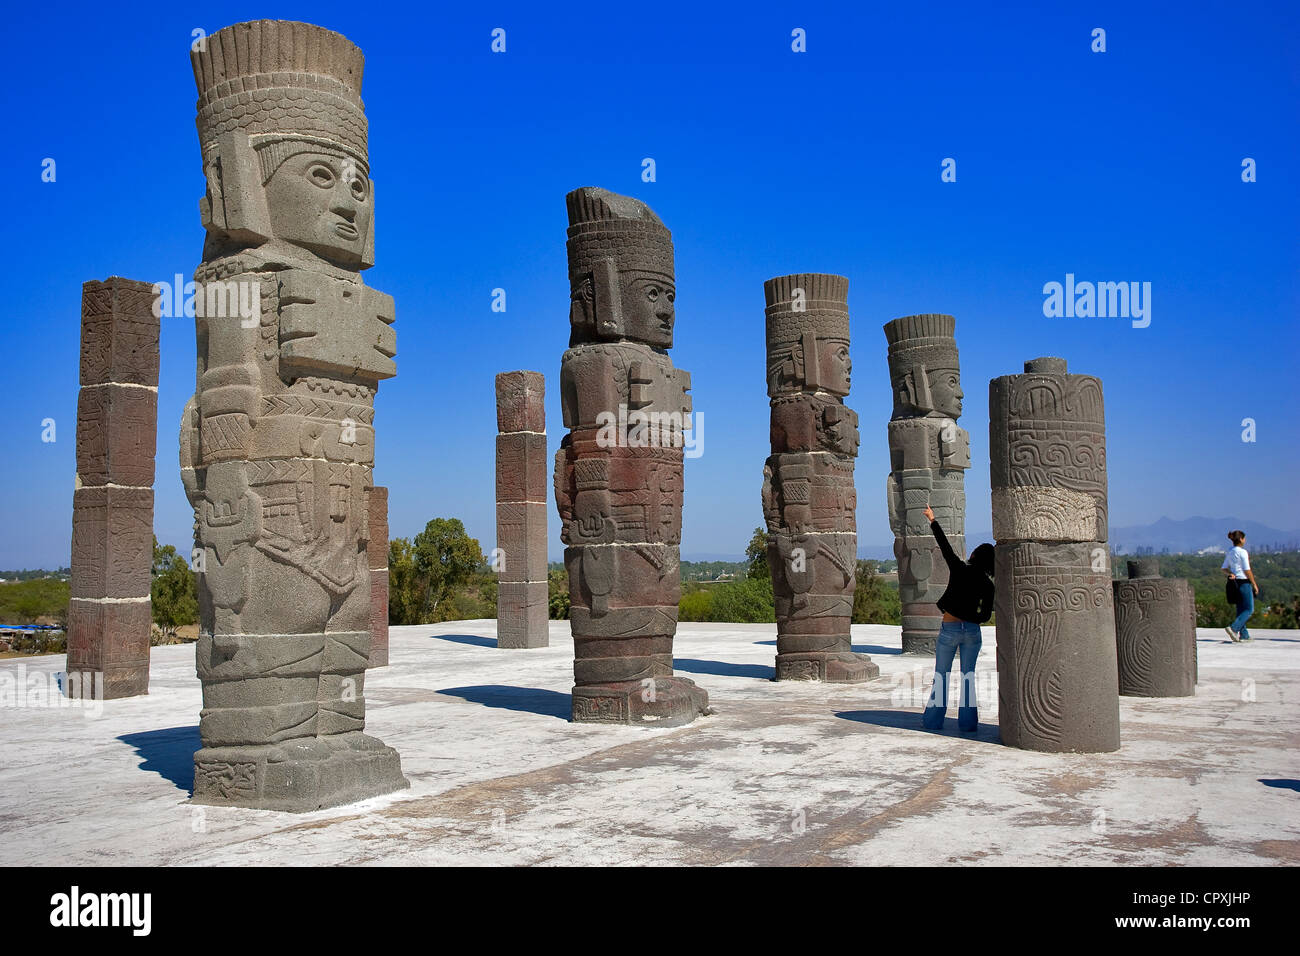 Mexico, Hidalgo State, Tula archeological site, ancient capital of the Toltecs, atlantes or stone soldiers Stock Photo